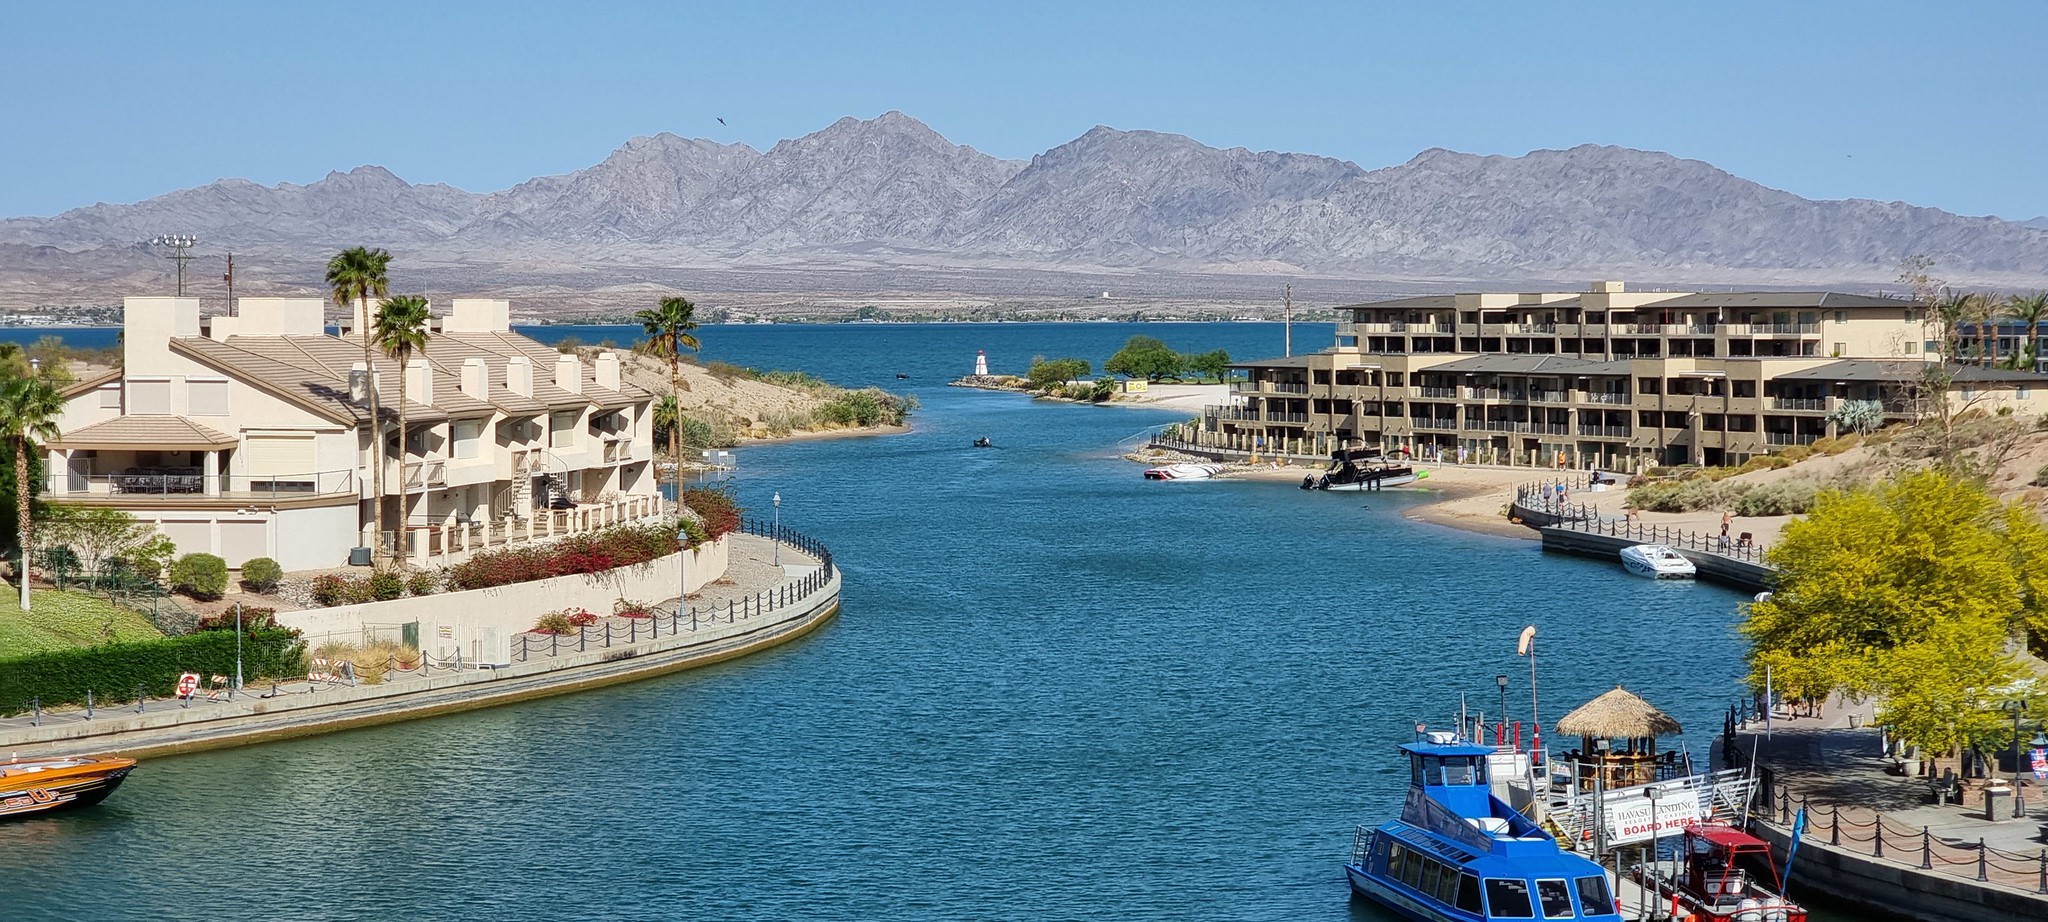 Another great view of Lake Havasu from London Bridge